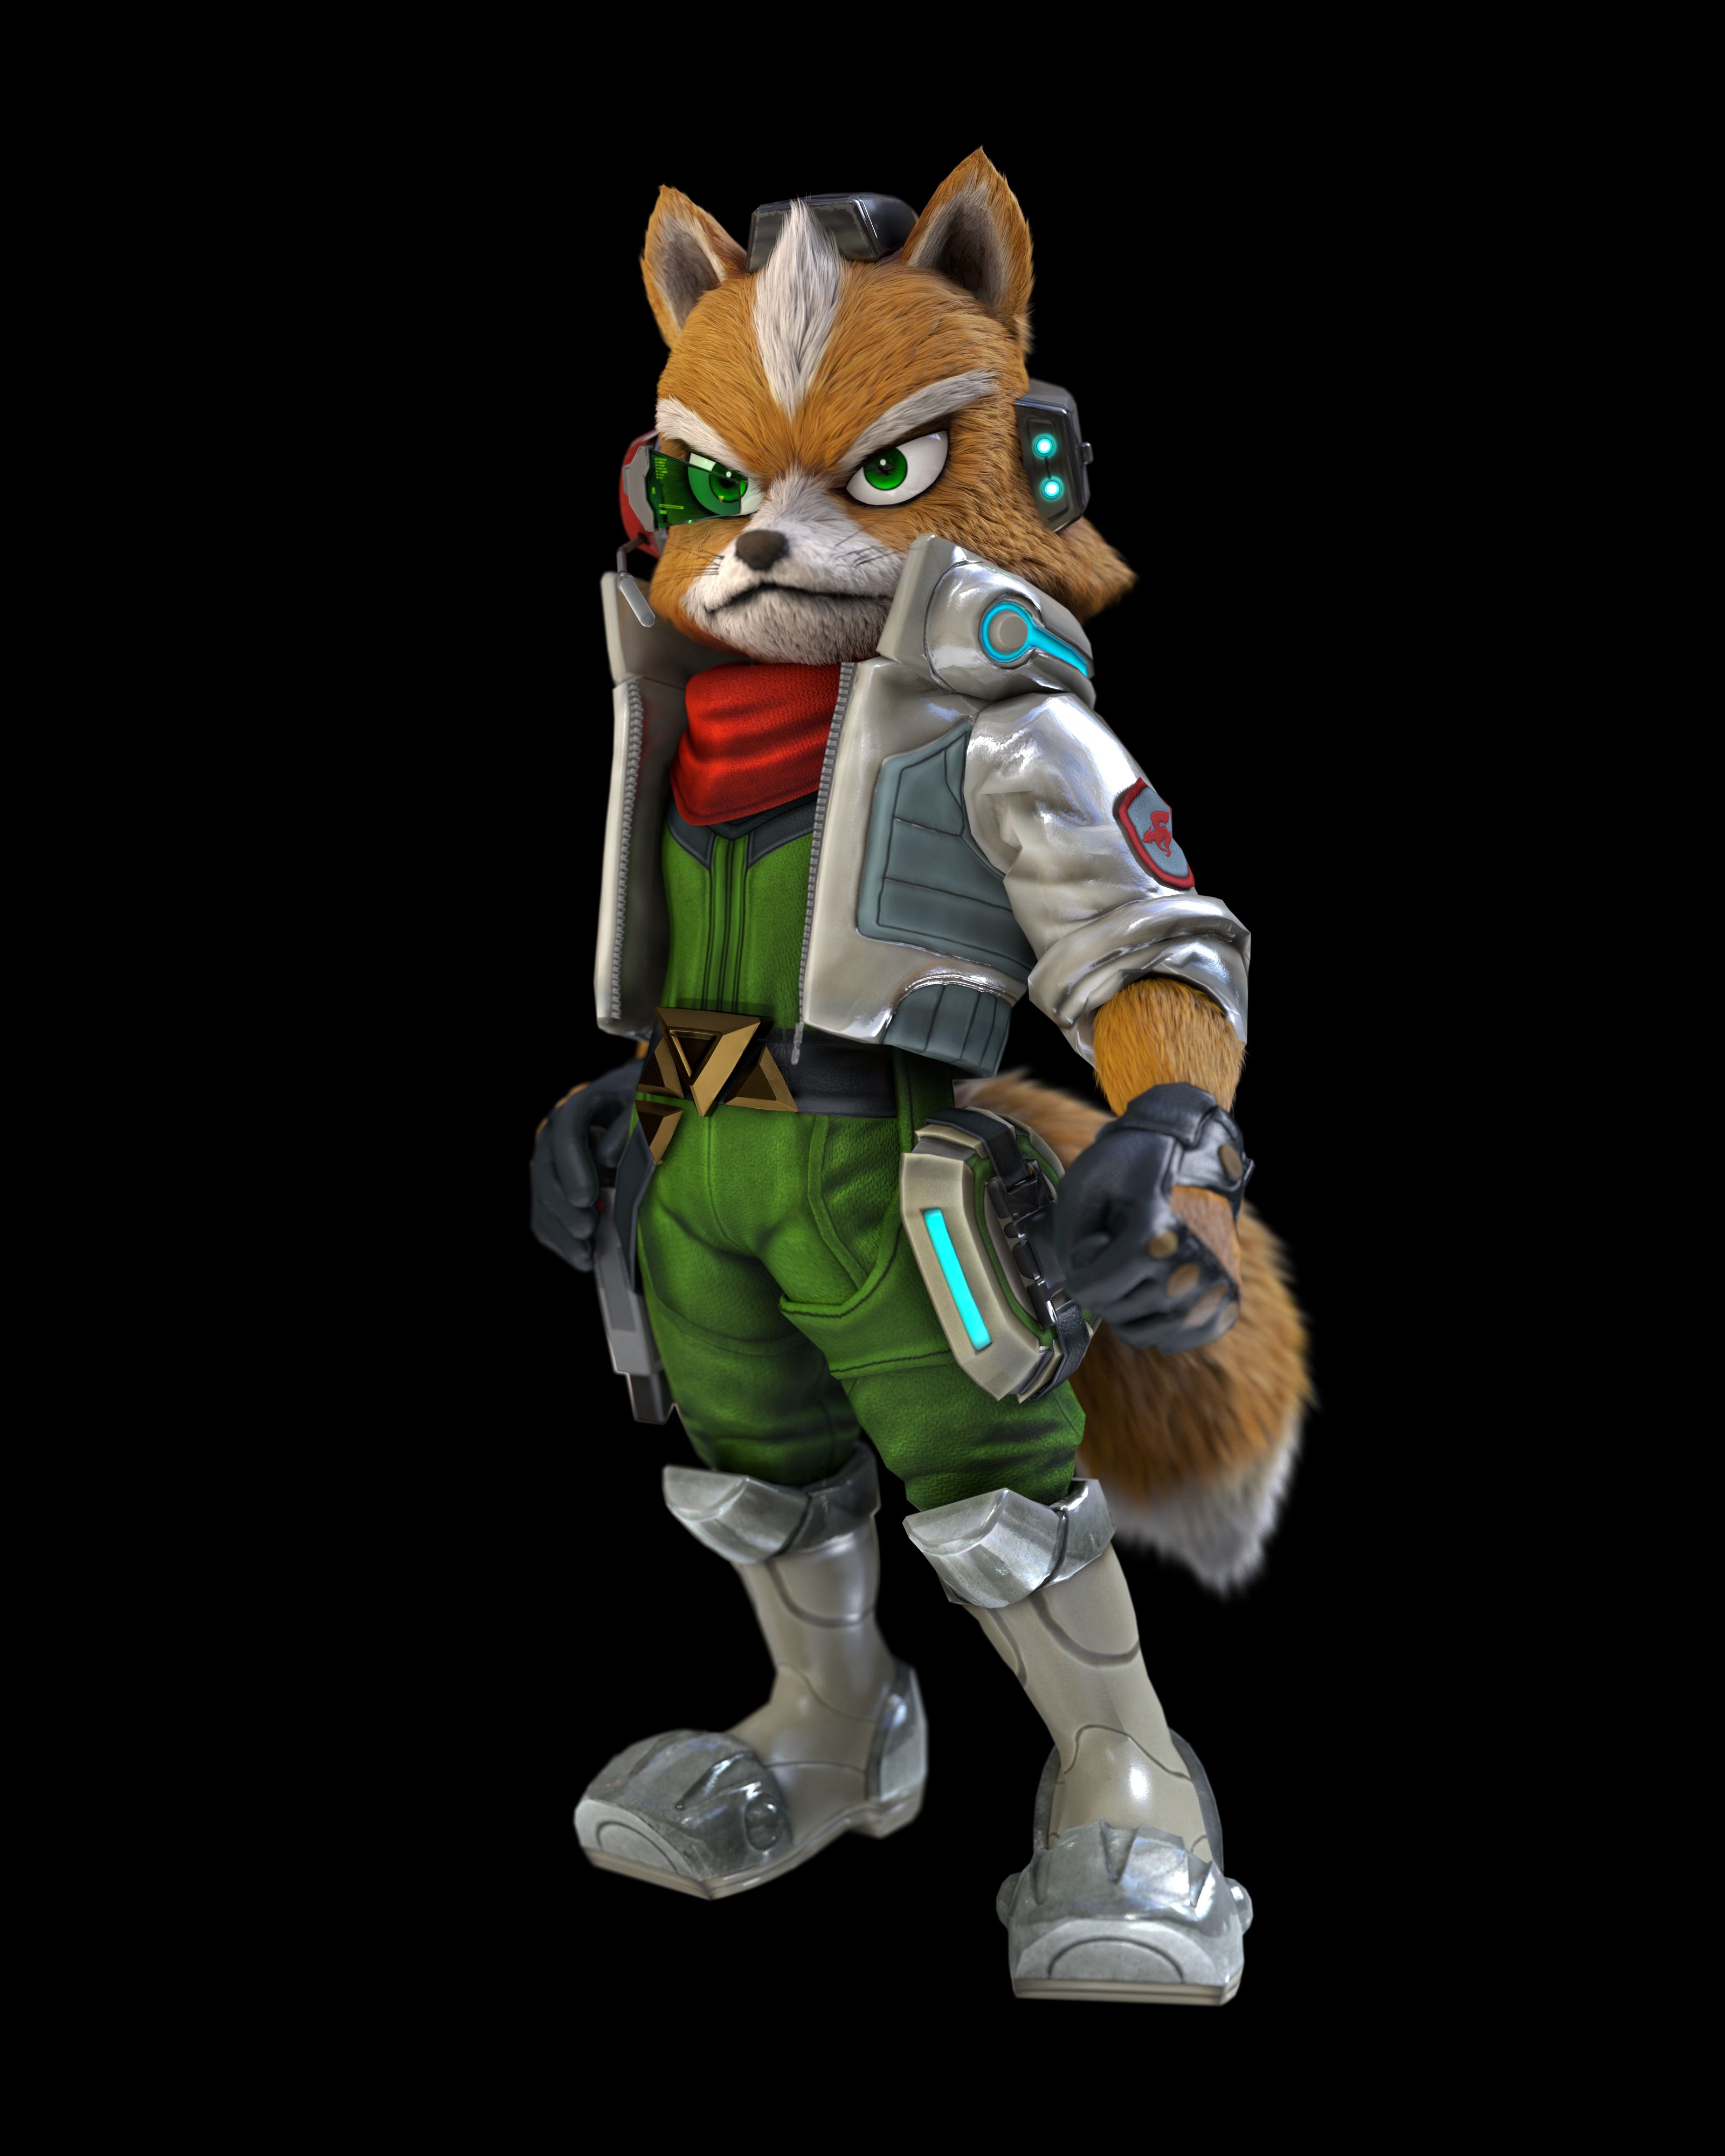 EU - Jump back into the Arwing at our official Star Fox Zero